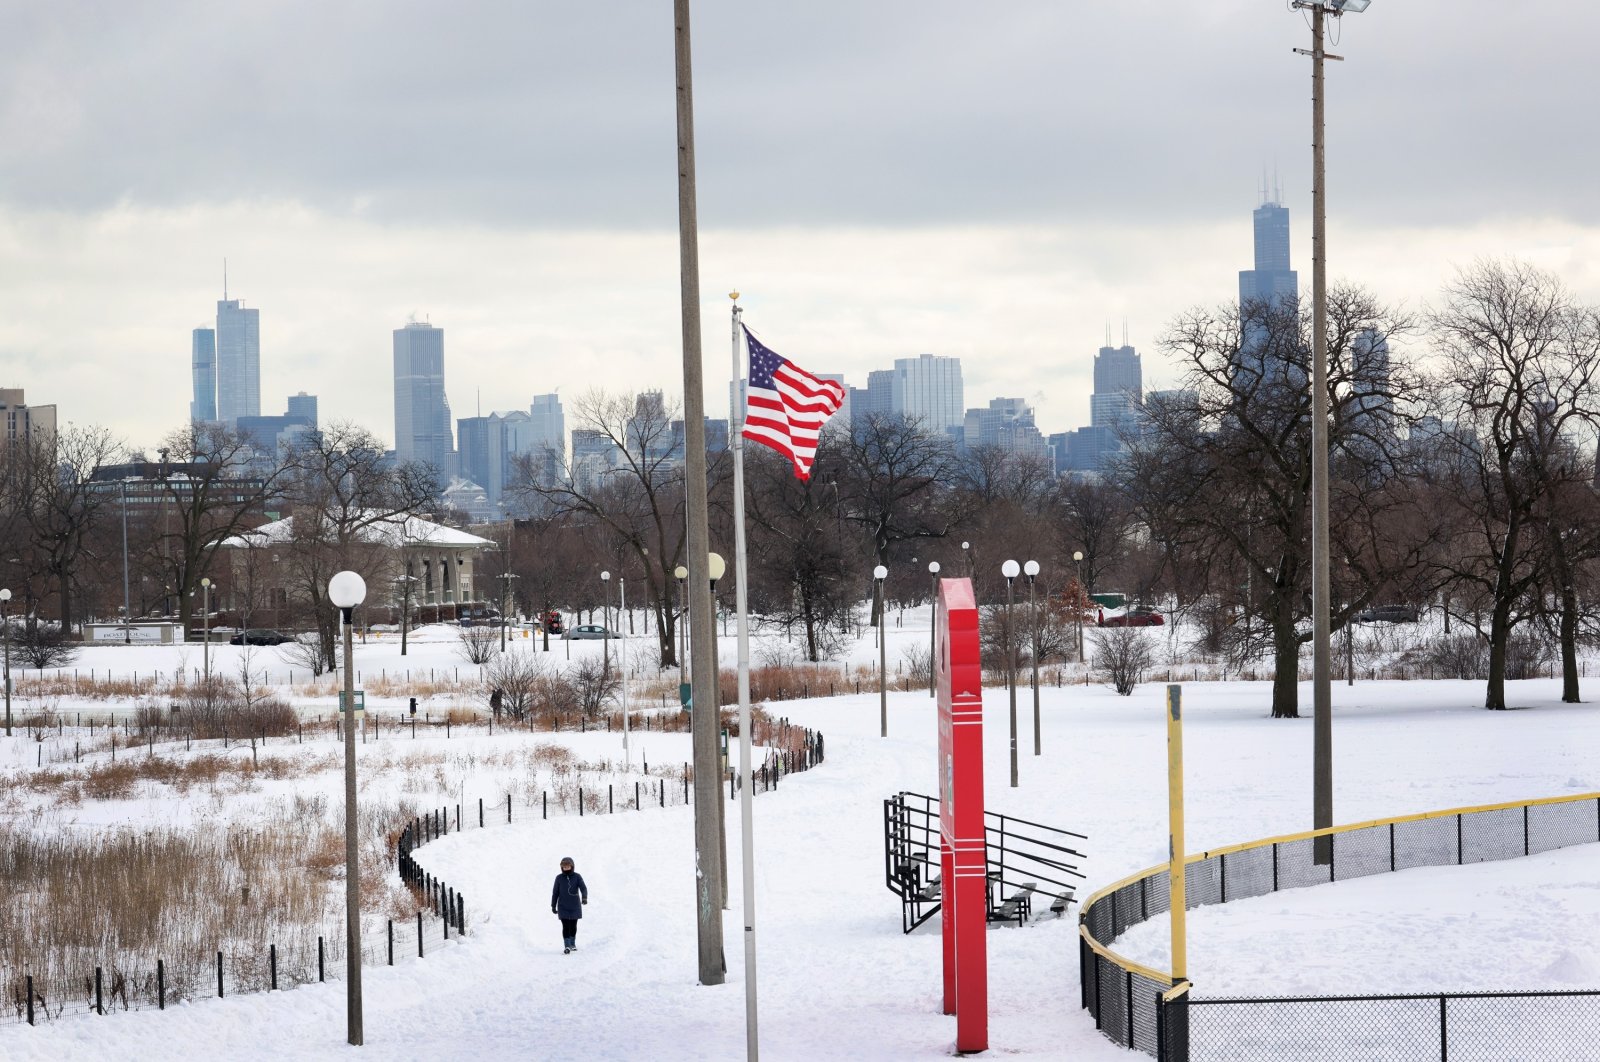 A woman walks down a snow-covered path in Humboldt Park in Chicago, Illinois, U.S., Feb. 1, 2021. (AFP Photo)